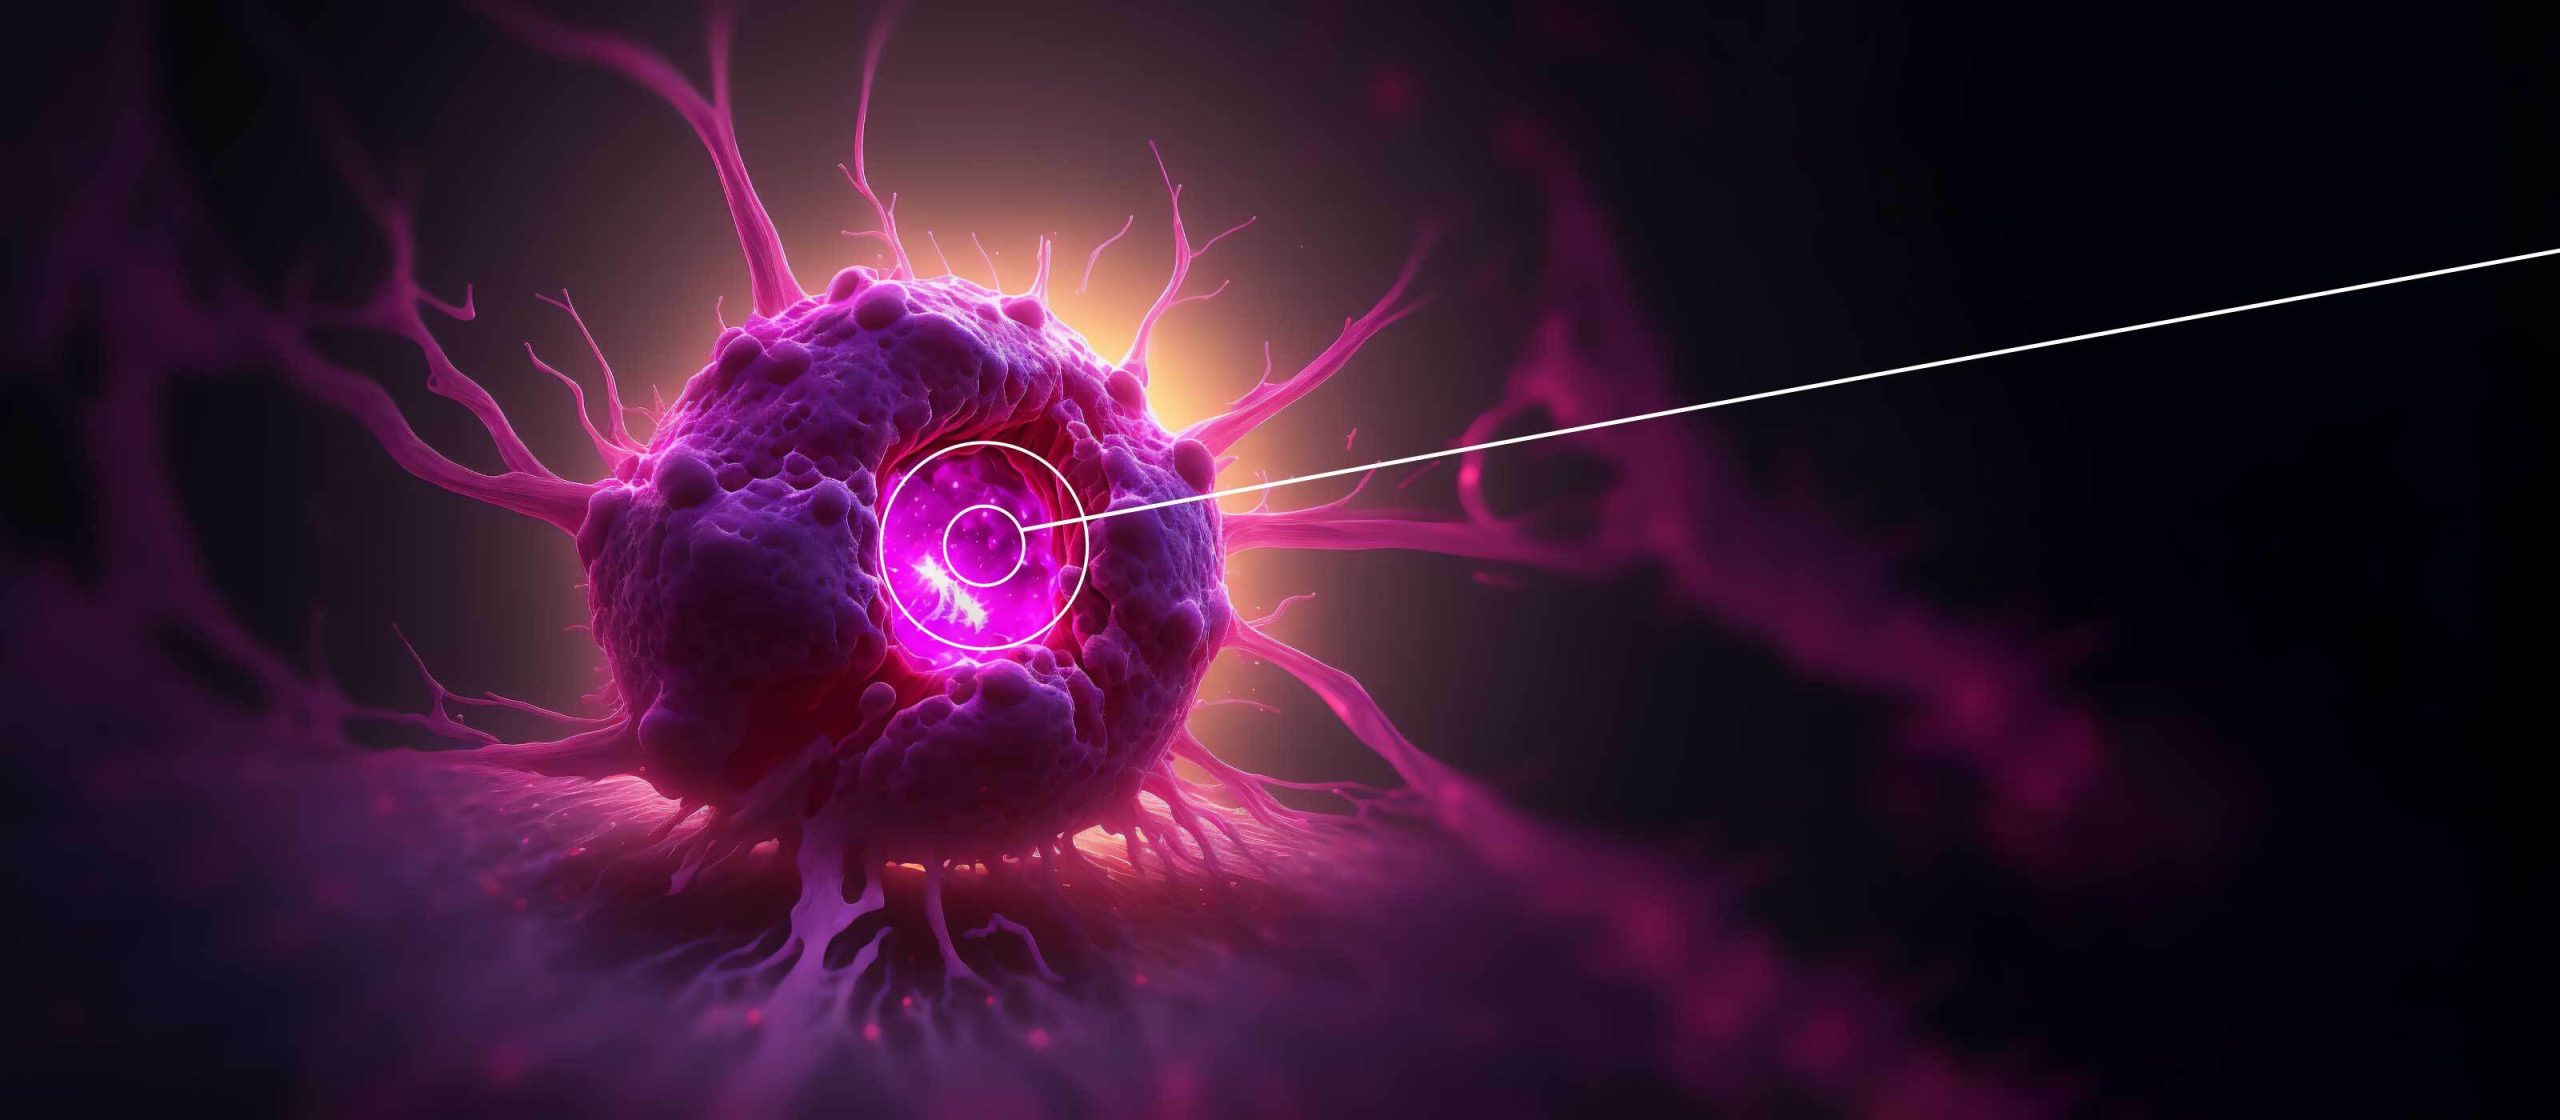 cancer cell being targeted with boron neutron capture therapy being done